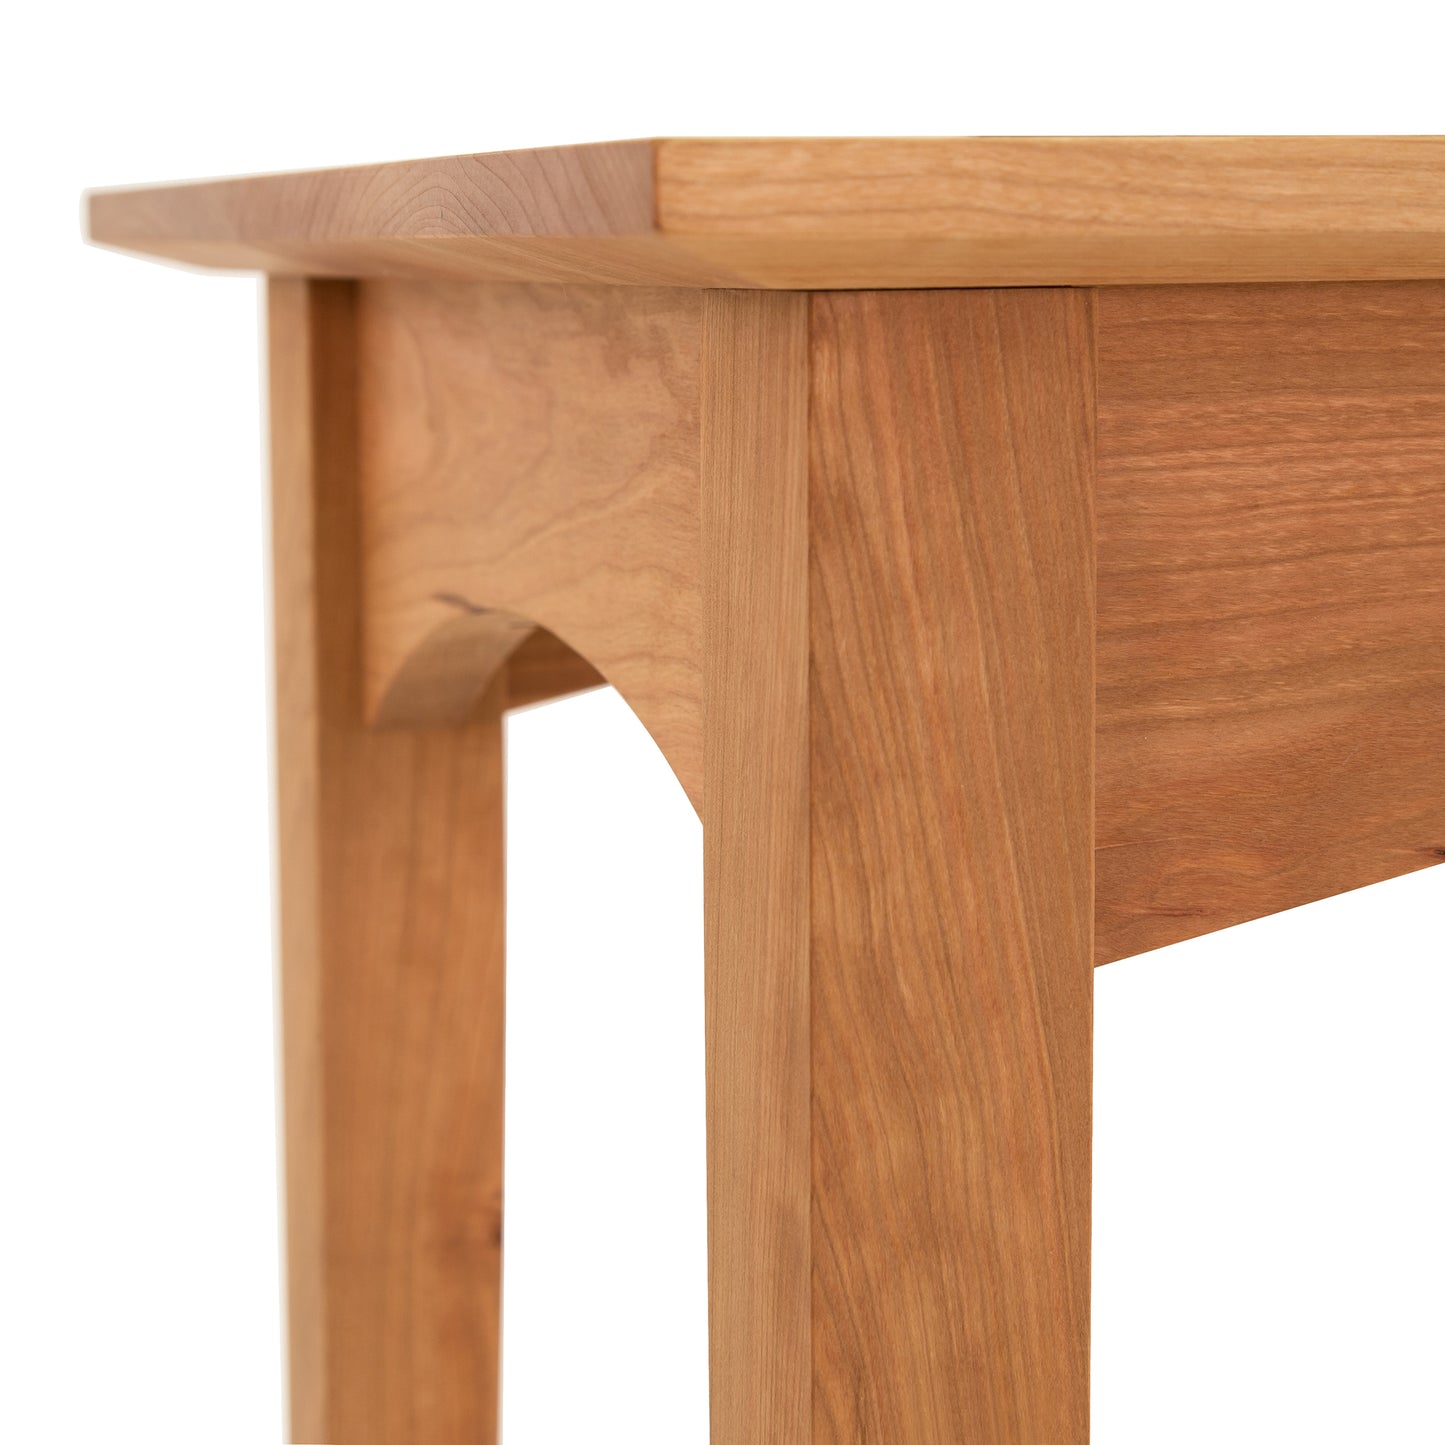 Close-up of a Maple Corner Woodworks American Shaker Sofa Table corner showcasing the grain pattern and eco-friendly solid wood joinery.